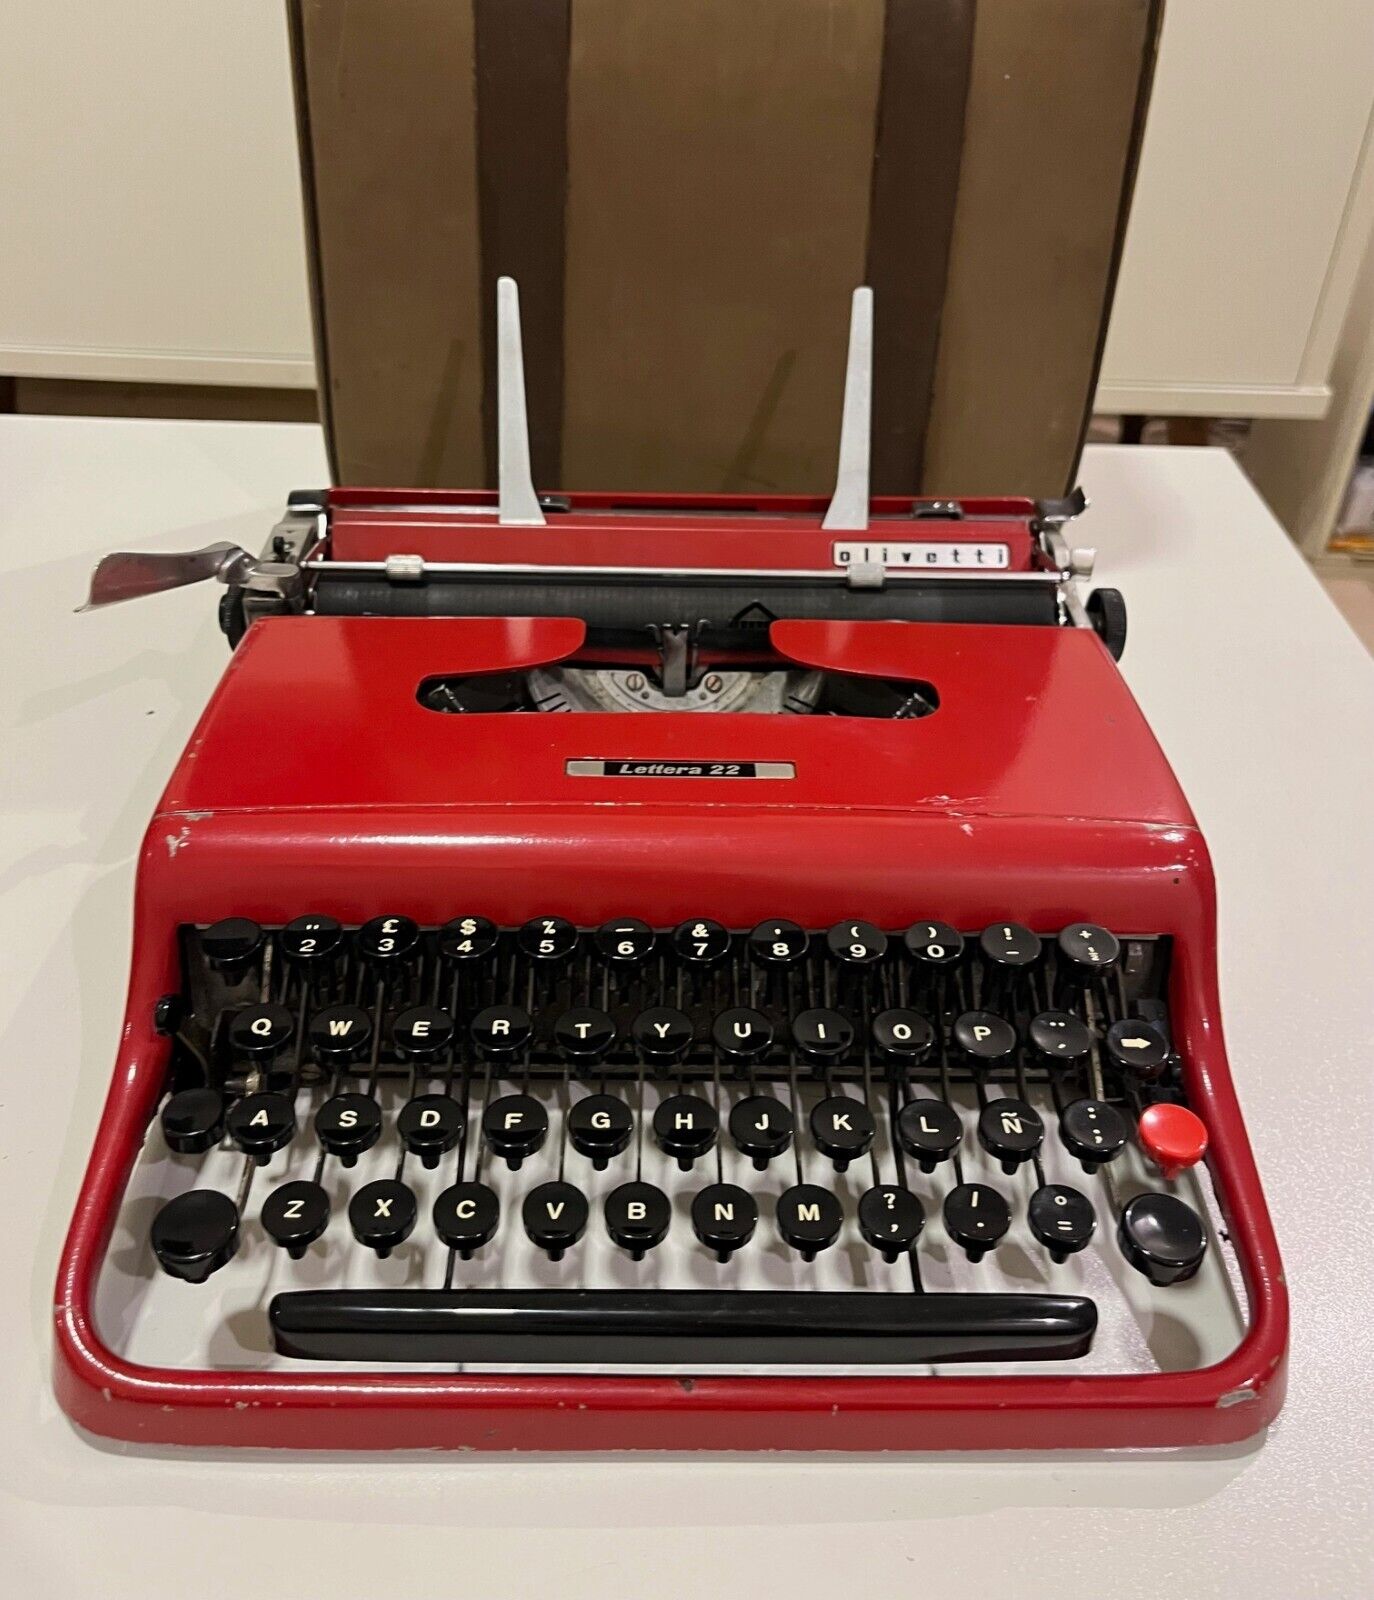 OLIVETTI LETTERA 22 MADE IN ITALY BY IVREA 1950. SERIAL # 025723. RED